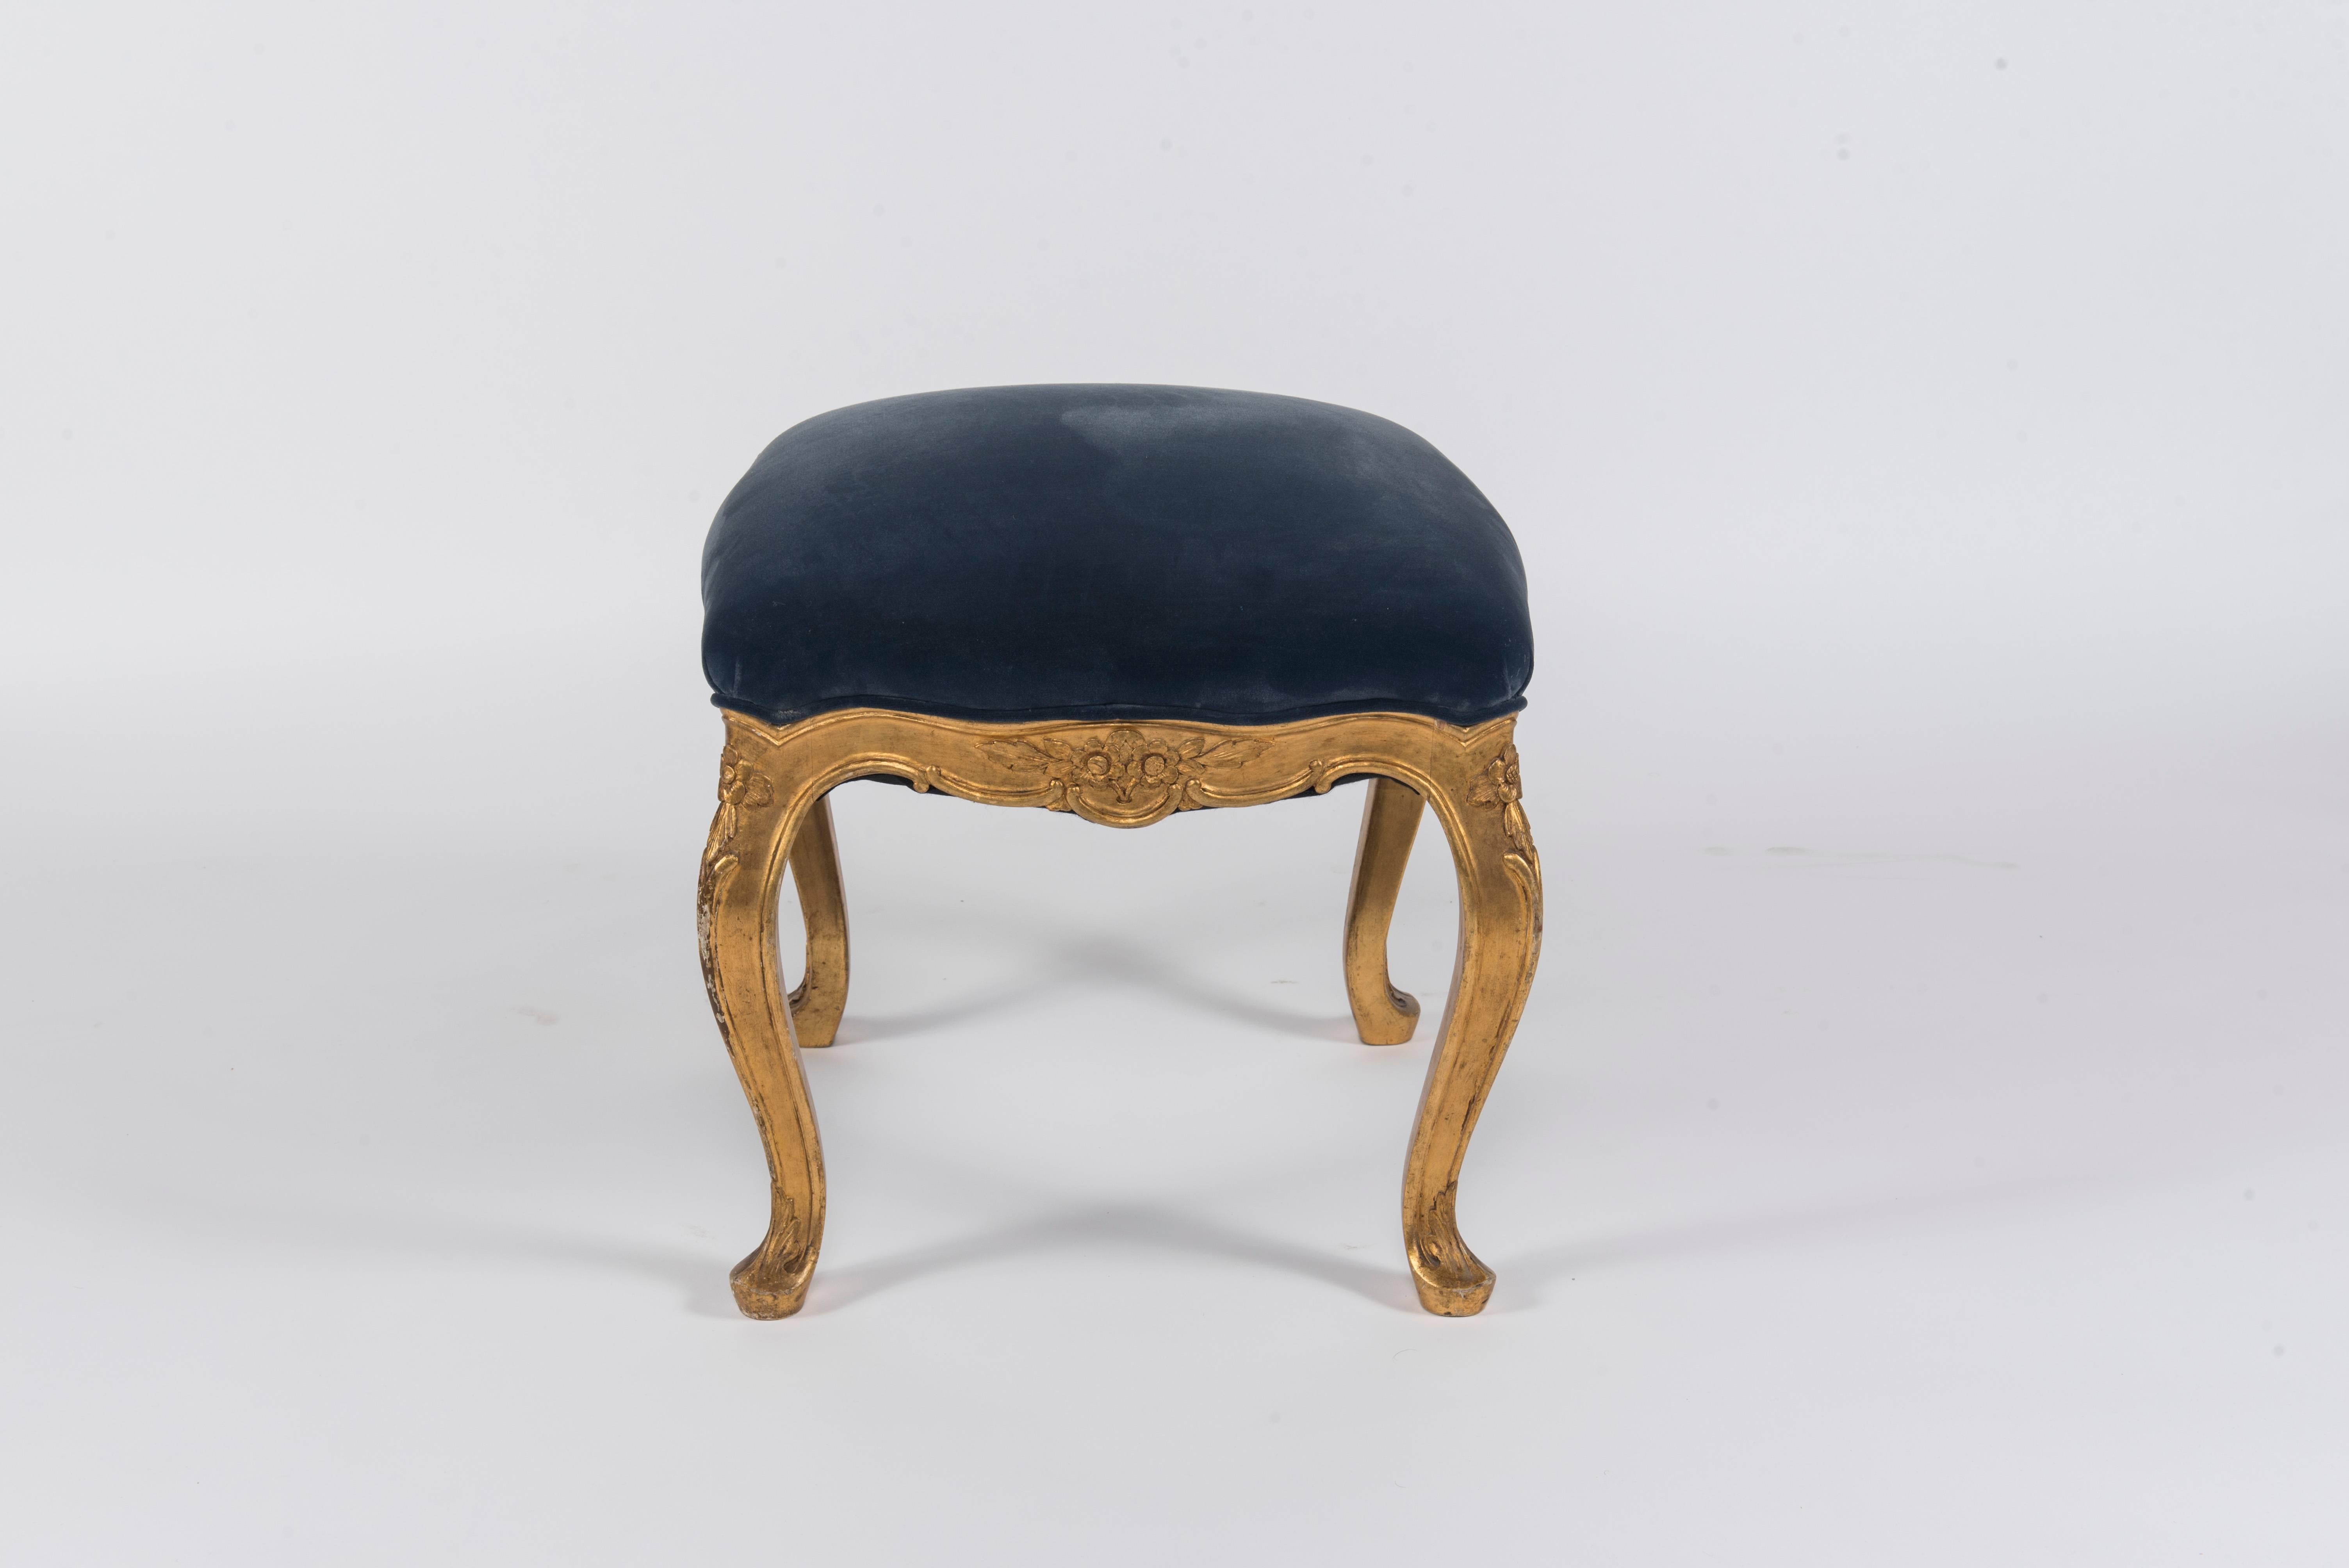 19th century French Louis XV style giltwood ottoman, newly upholstered in a Prussian blue velvet.